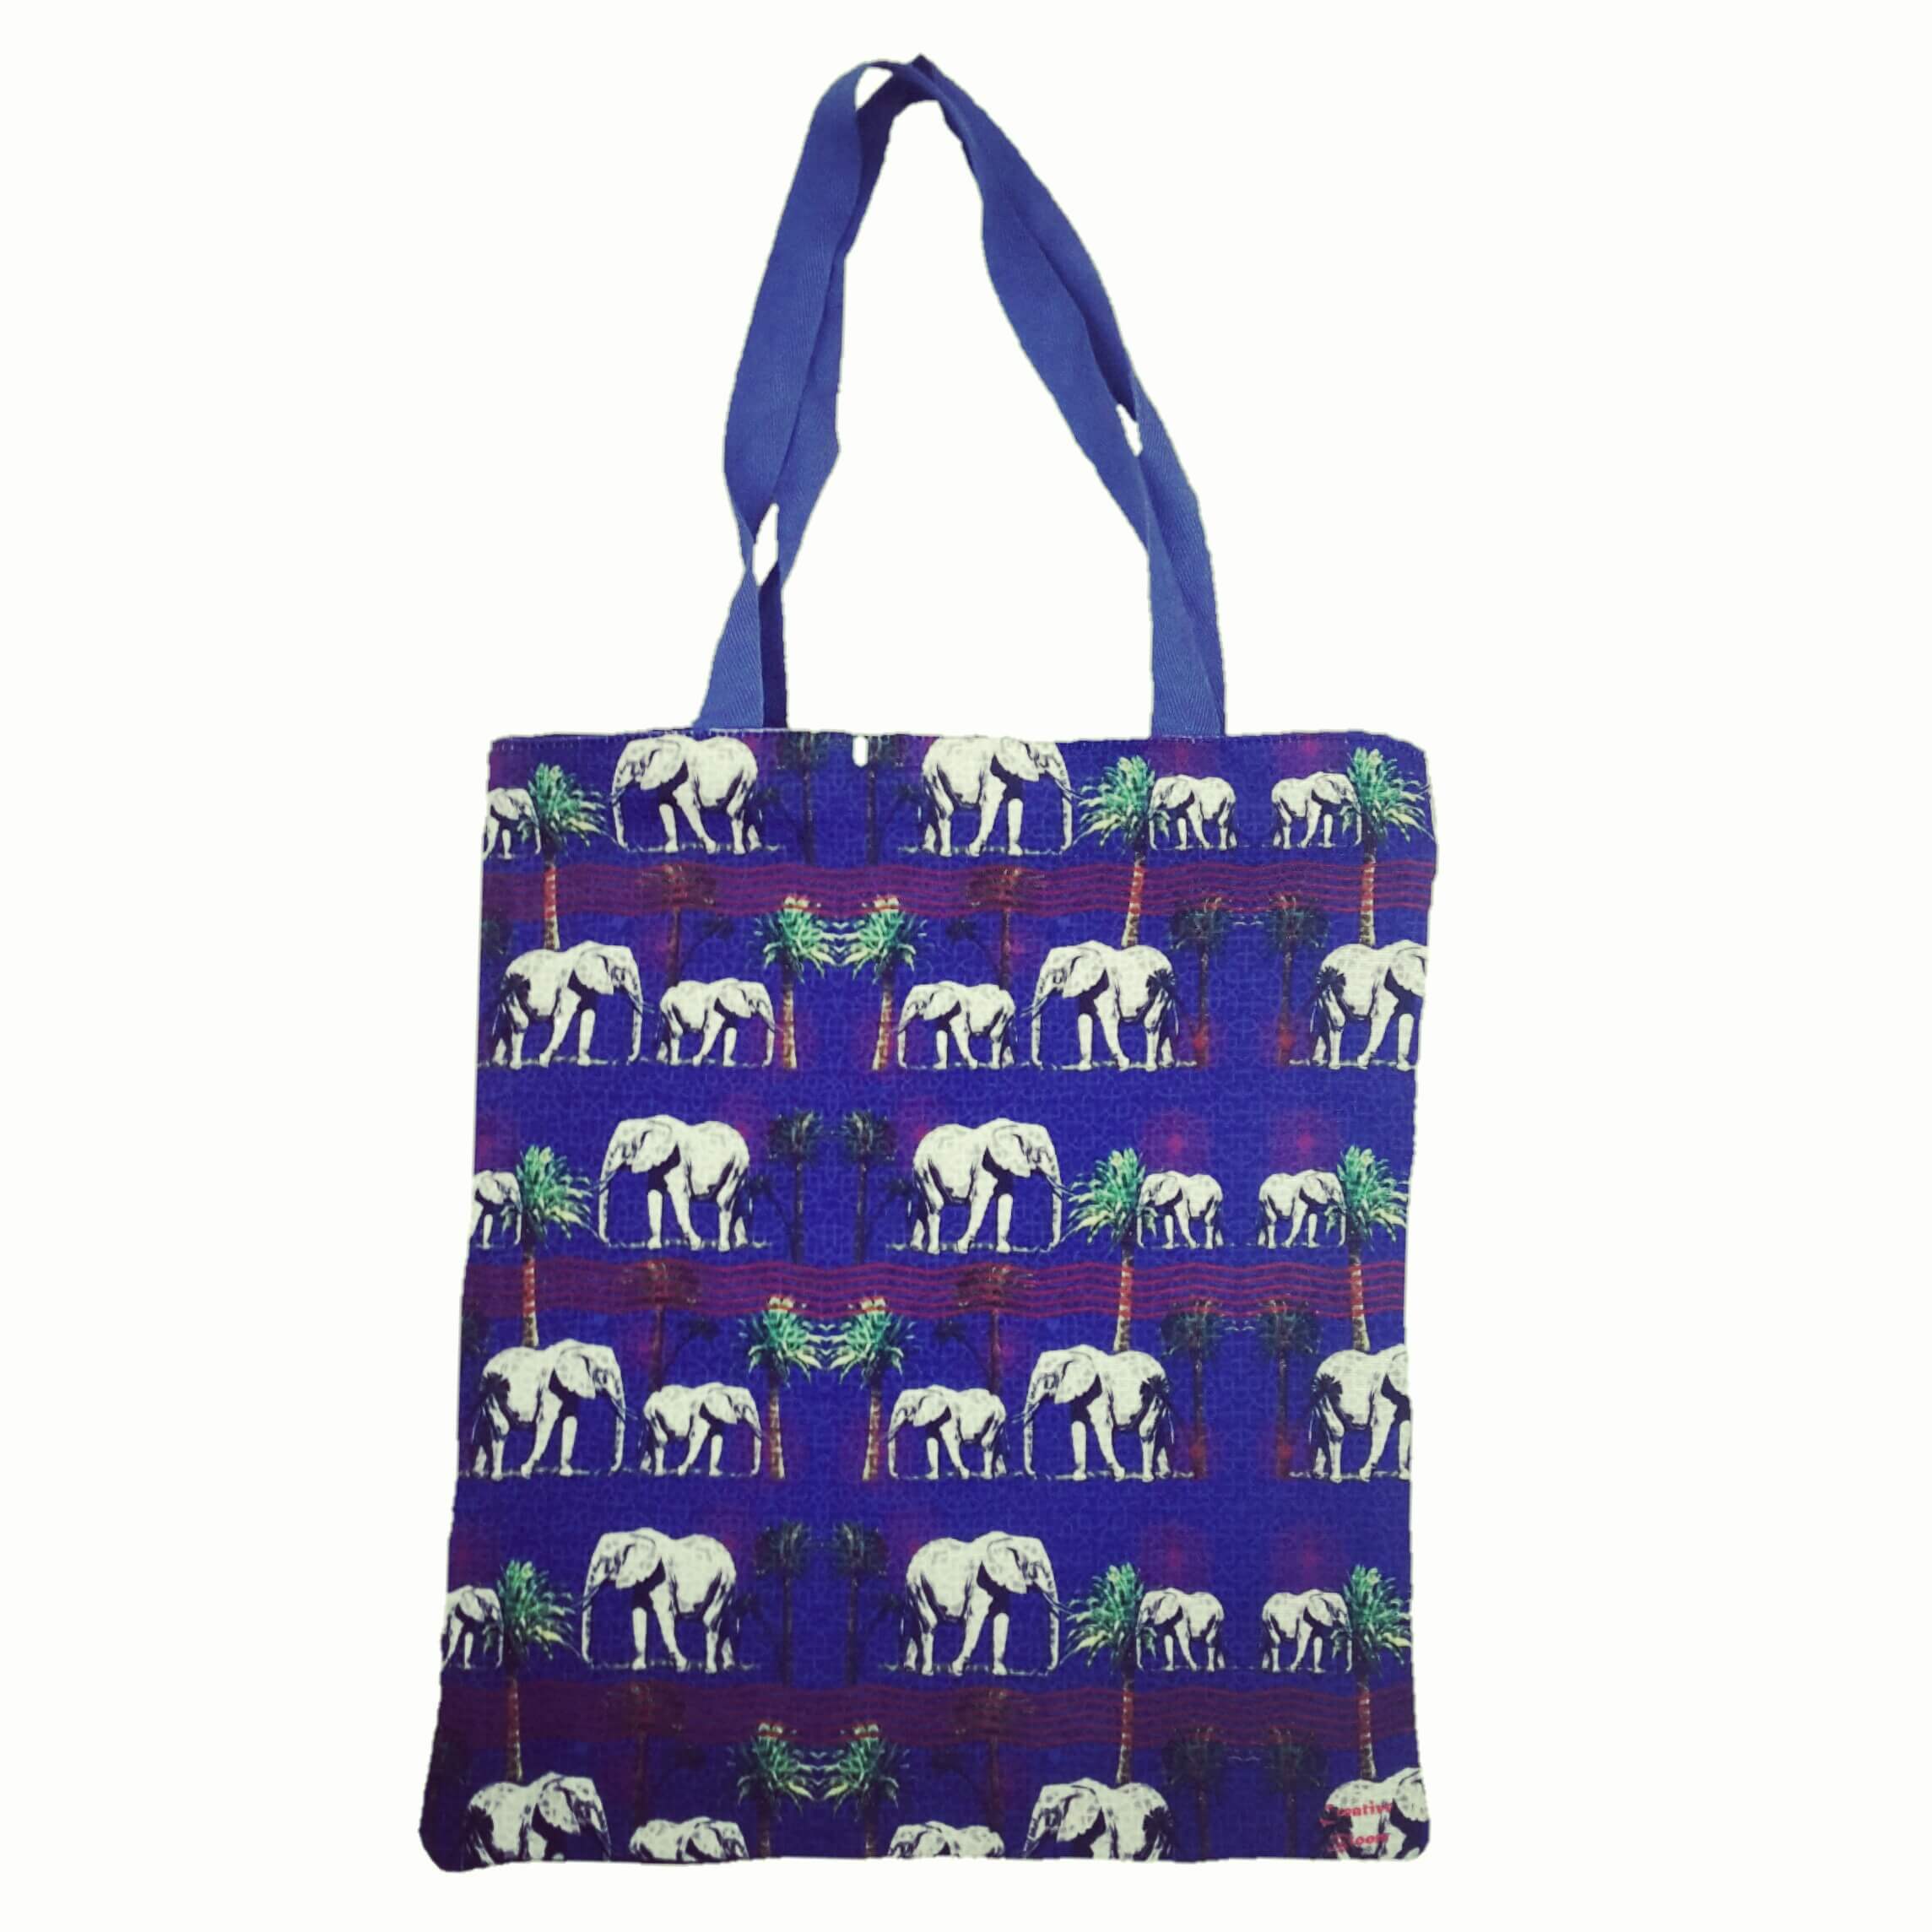 Elephants in the jungle Tote Bag